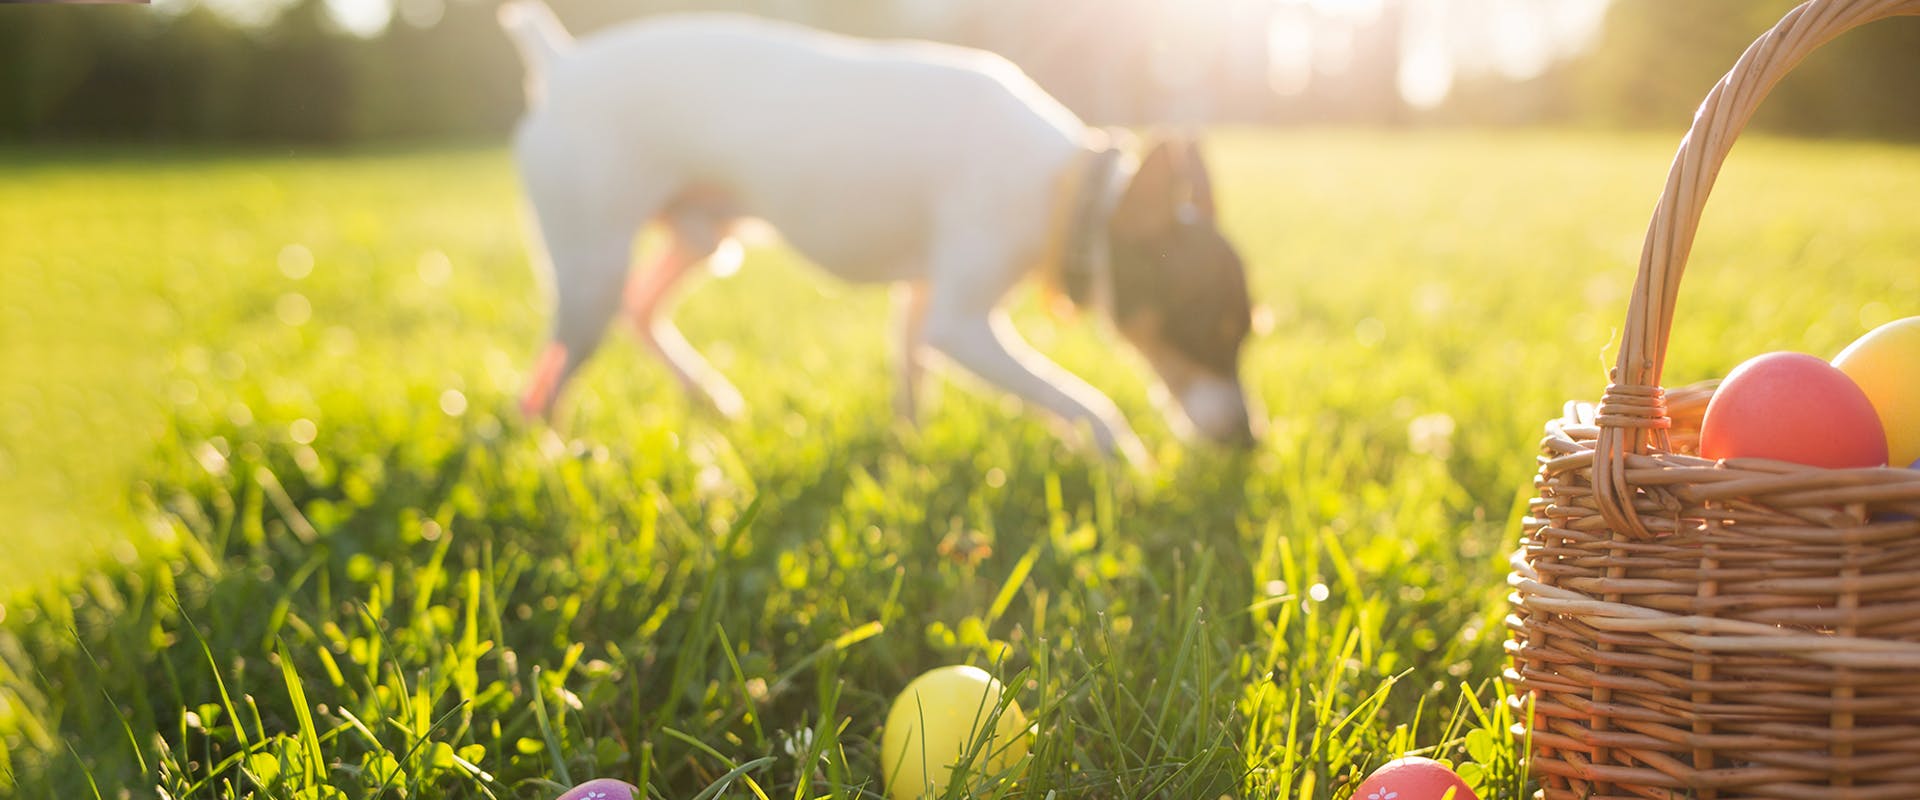 A dog in the sniffing through the grass in a garden, a basket and piles of plastic Easter eggs in the foreground